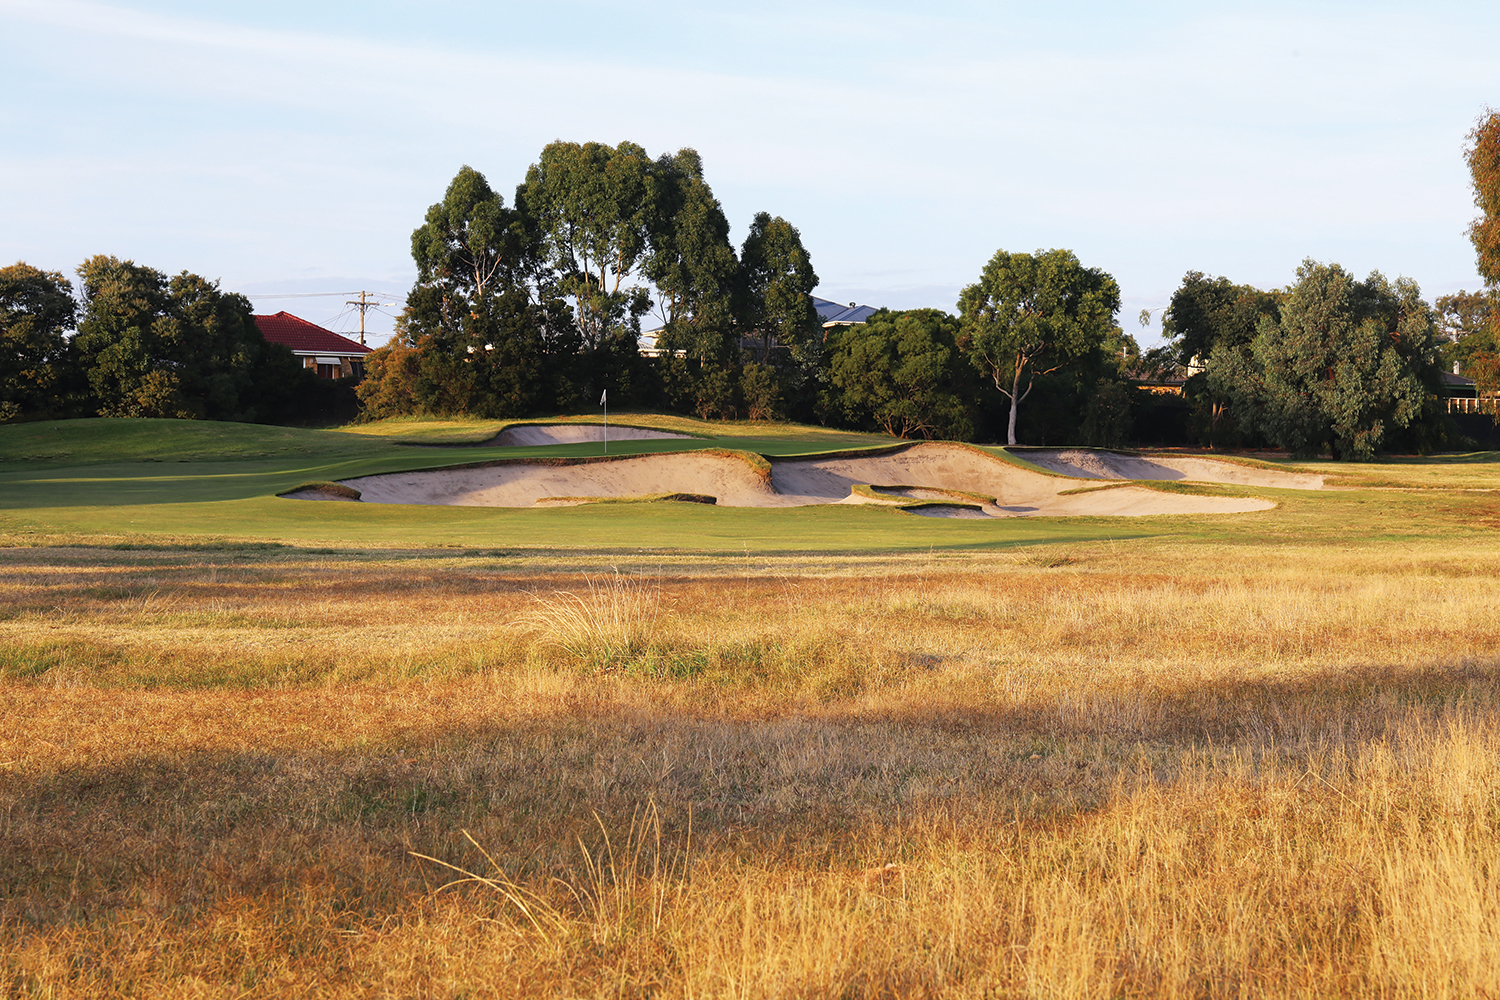 Yarra Yarra’s 11th hole is one of Australia’s finest par 3s.